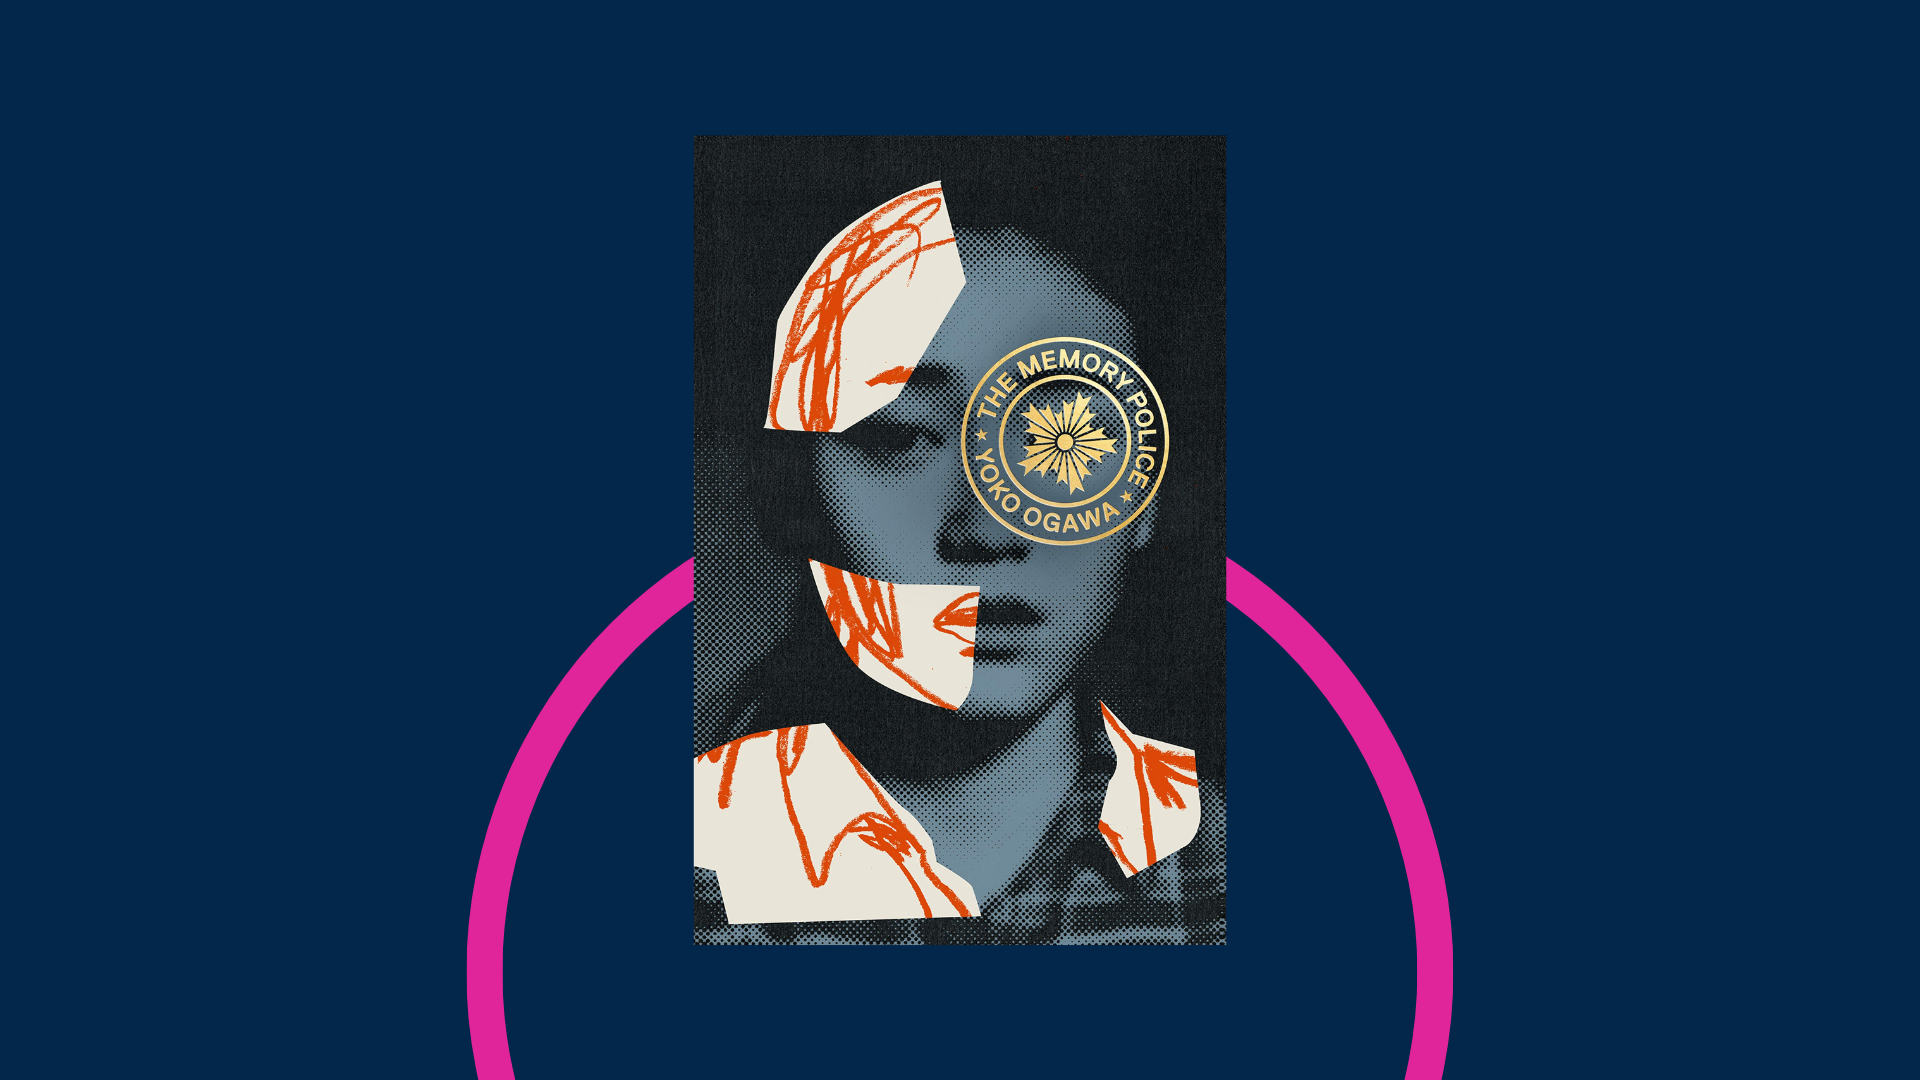 Book cover of the Memory Police on a graphic background. Cover features a woman's face in dark blue, with various sections covered over by rough sketches.